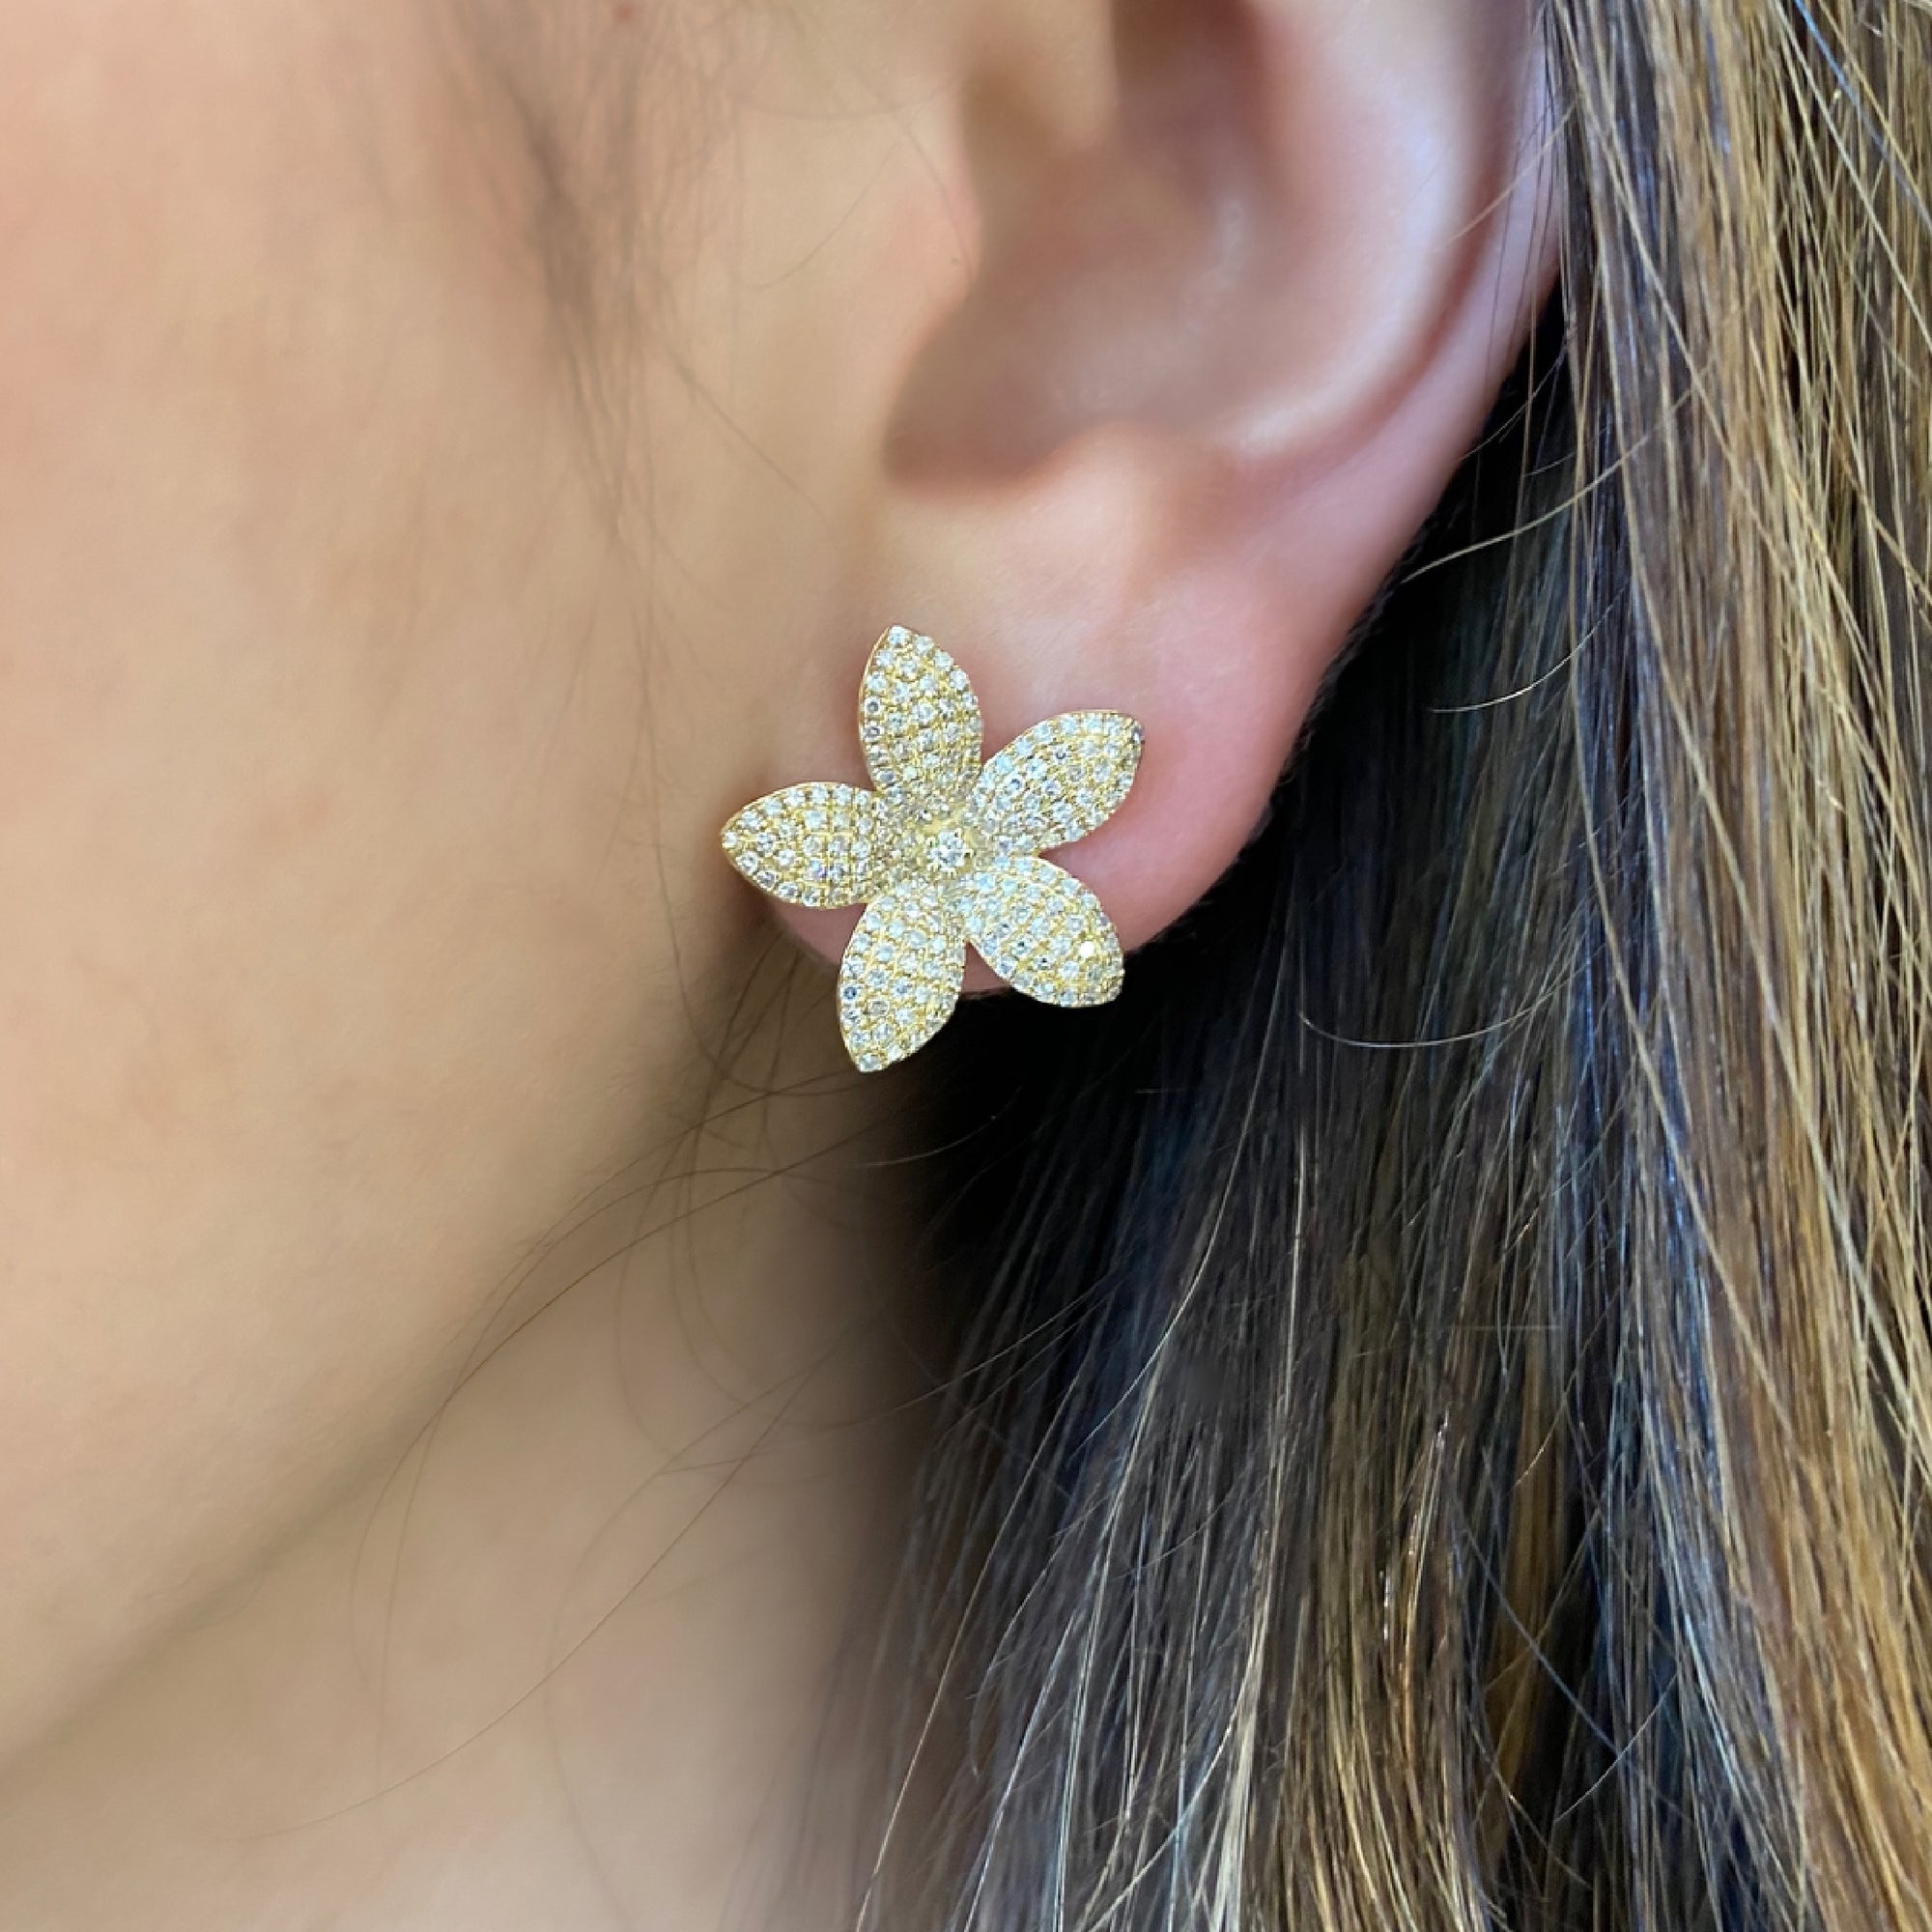 pave diamond flower stud earrings  -14K gold weighing 3.32 grams  -342 round diamonds totaling 0.90 carats